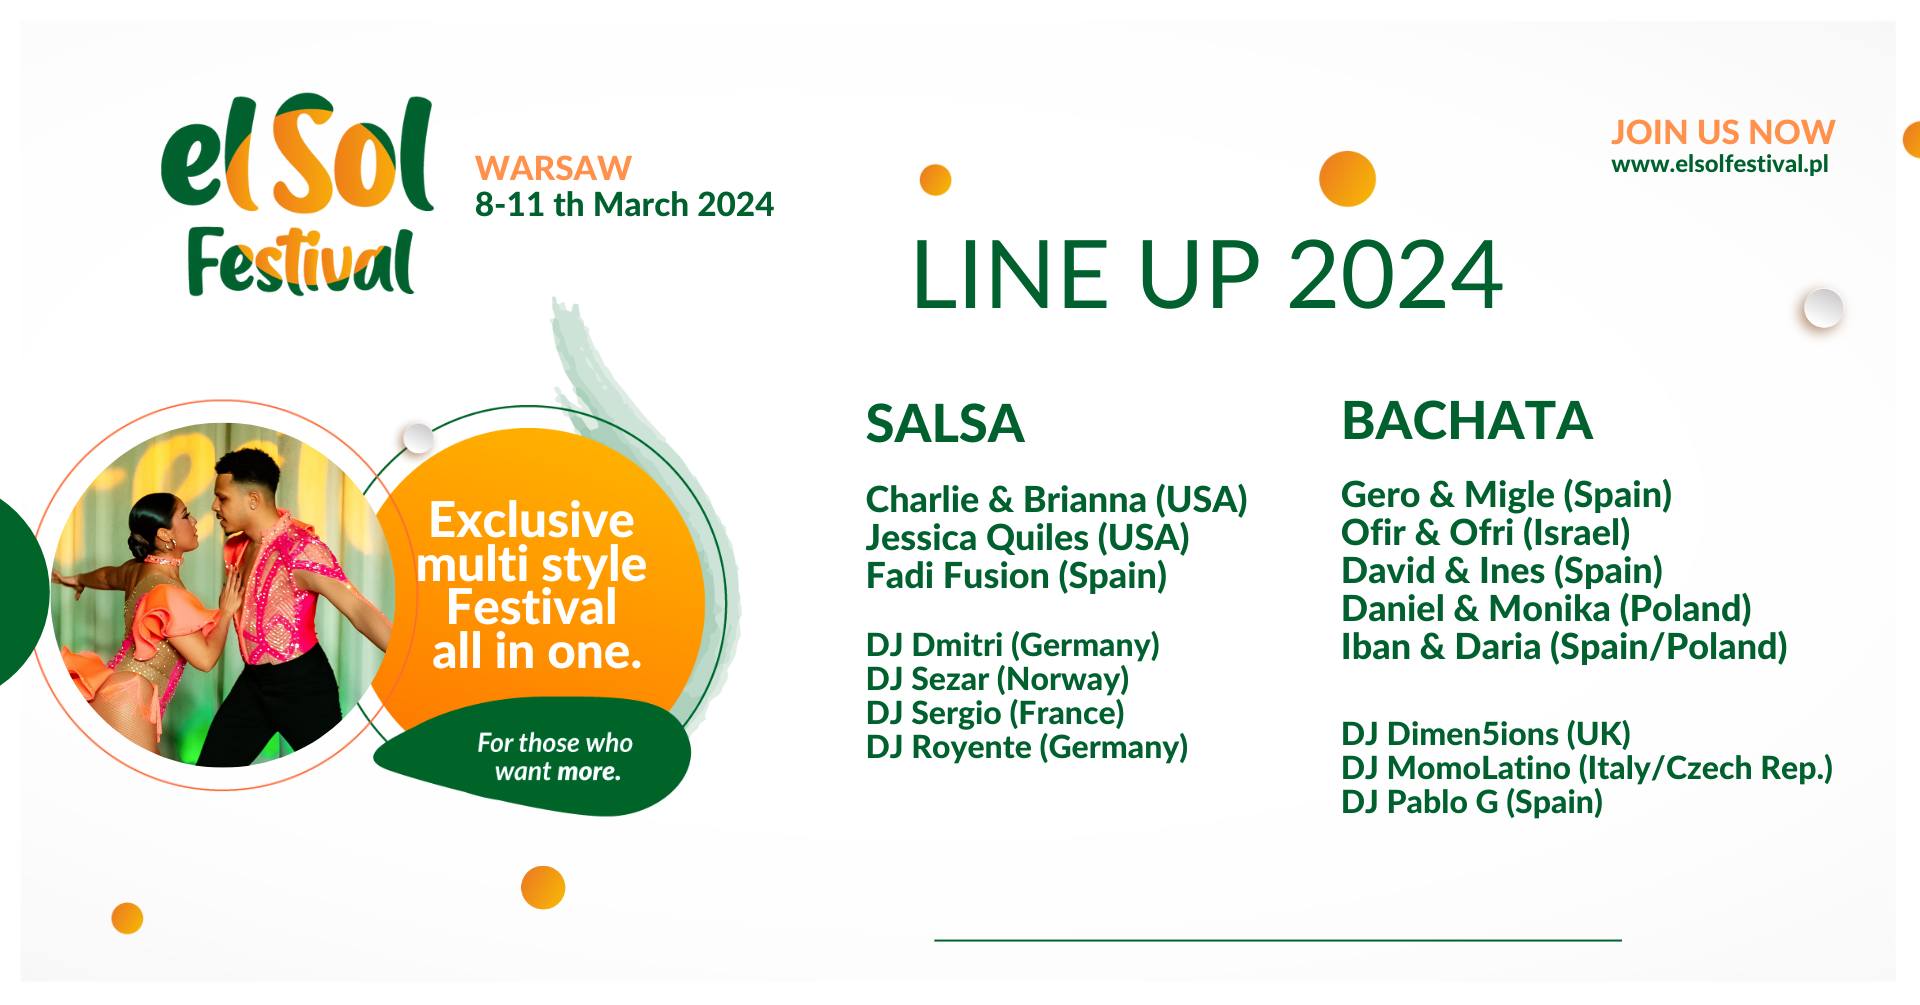 2nd ElSol Spring Edition. Salsa, Bachata, Warsaw, 8-11 March 2024